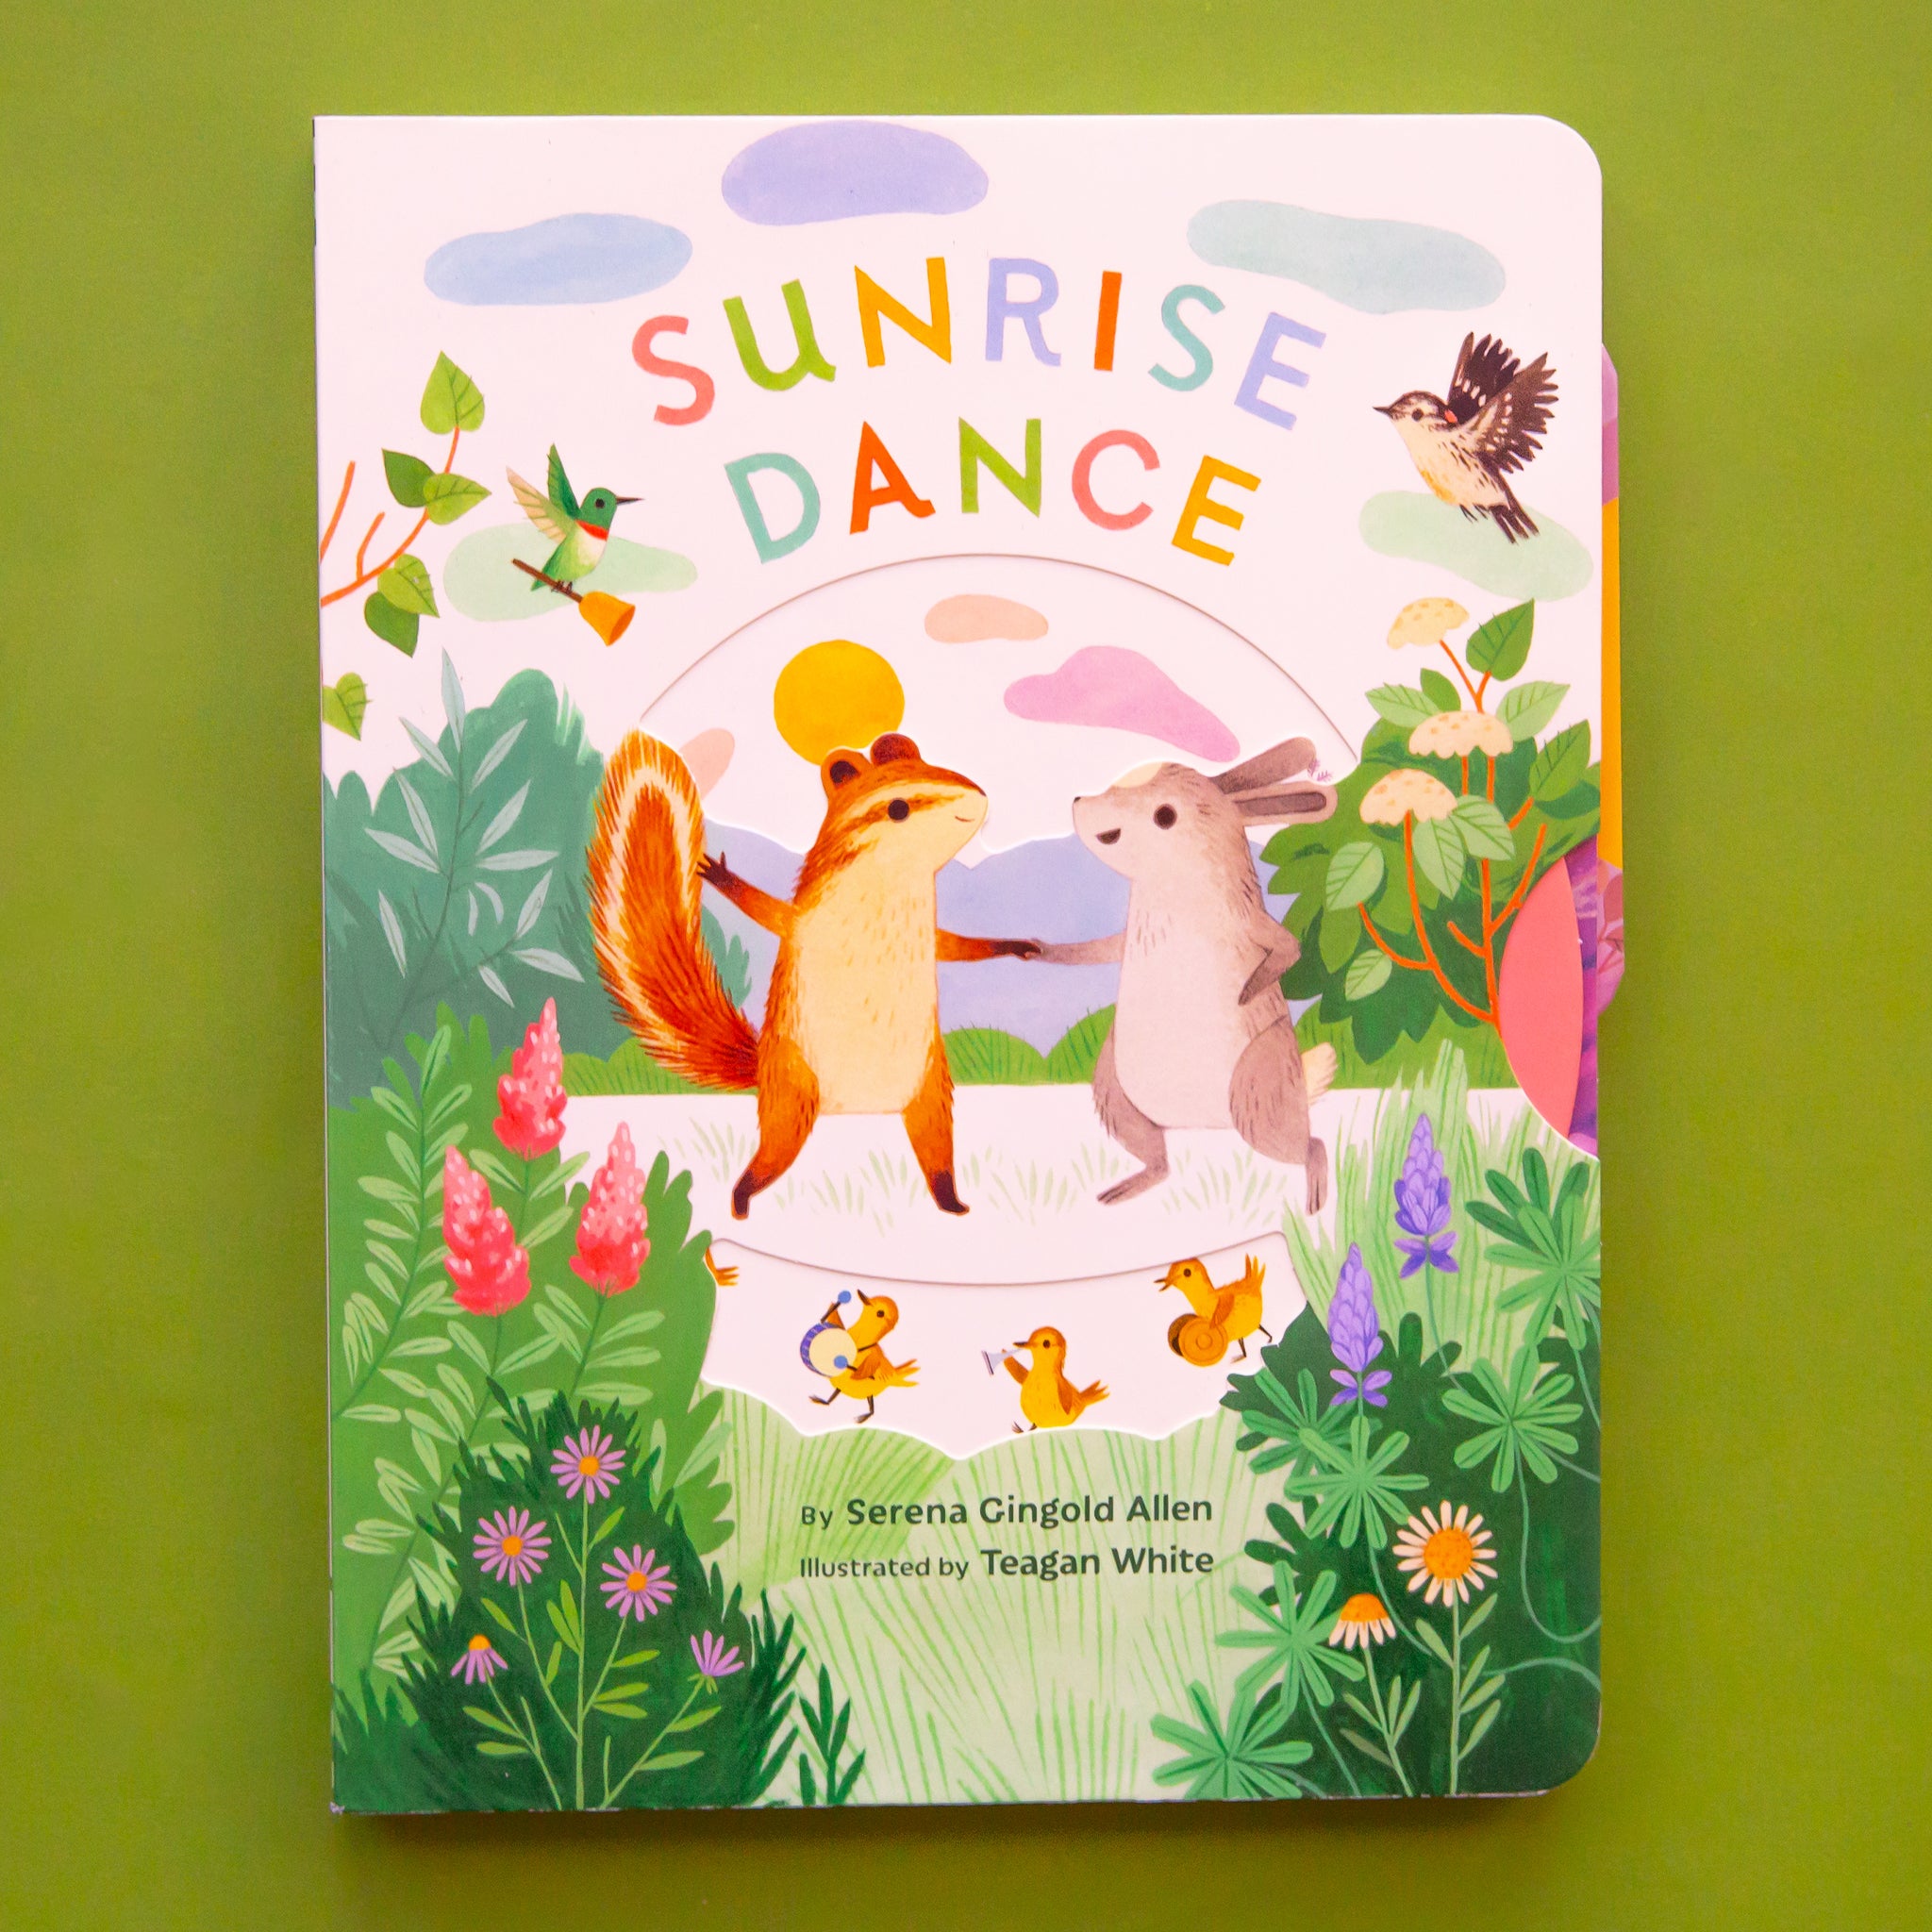 Hardcover children&#39;s book titled &#39;Sunrise Dance&#39; in colorful lettering. Below the title is a spring themed scene of animals dancing in a grass field. Animals include a squirrel and bunny holding hands, instrument playing ducklings and more.